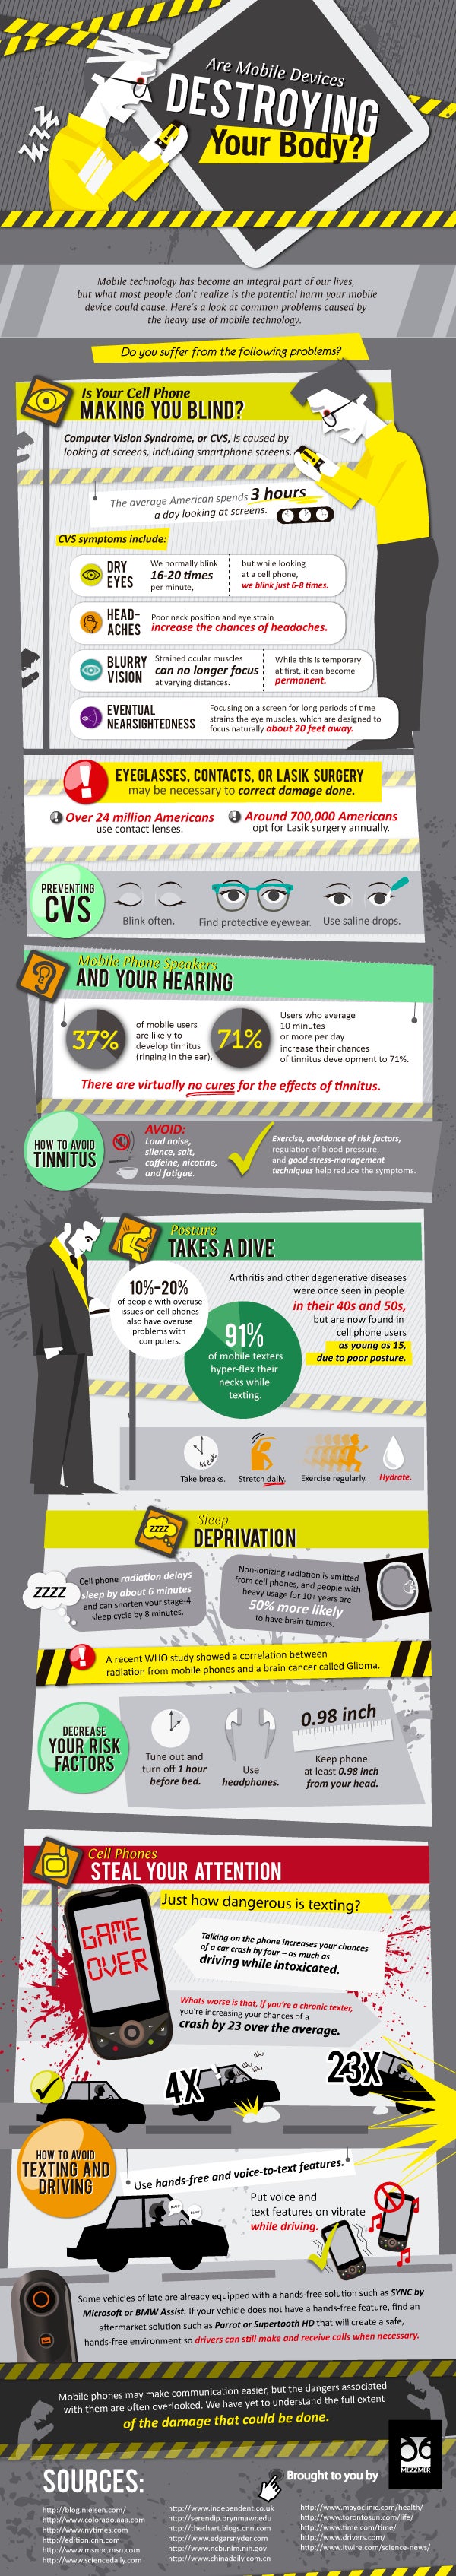 Mobile devices affect your health, what can you do about it (infographic)